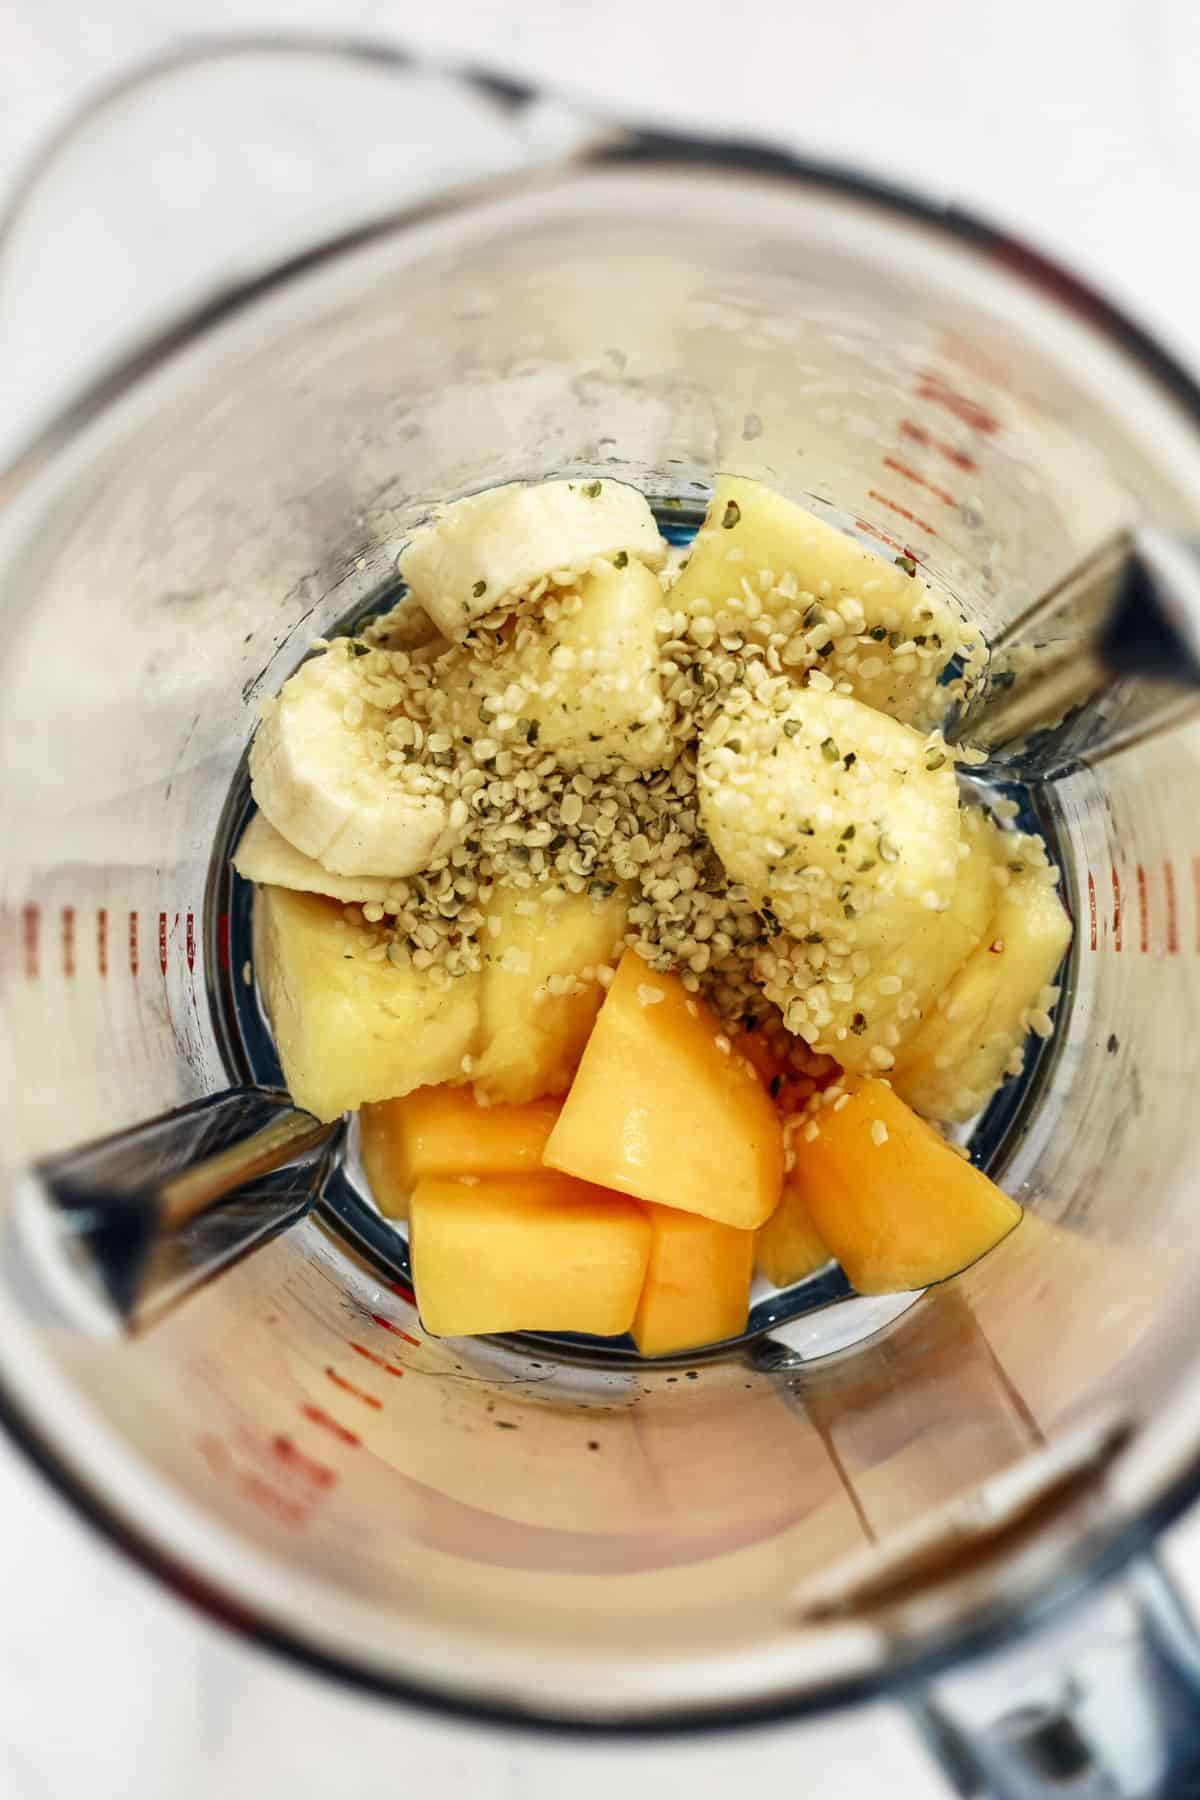 Tropical fruit and hemp seeds in a blender.